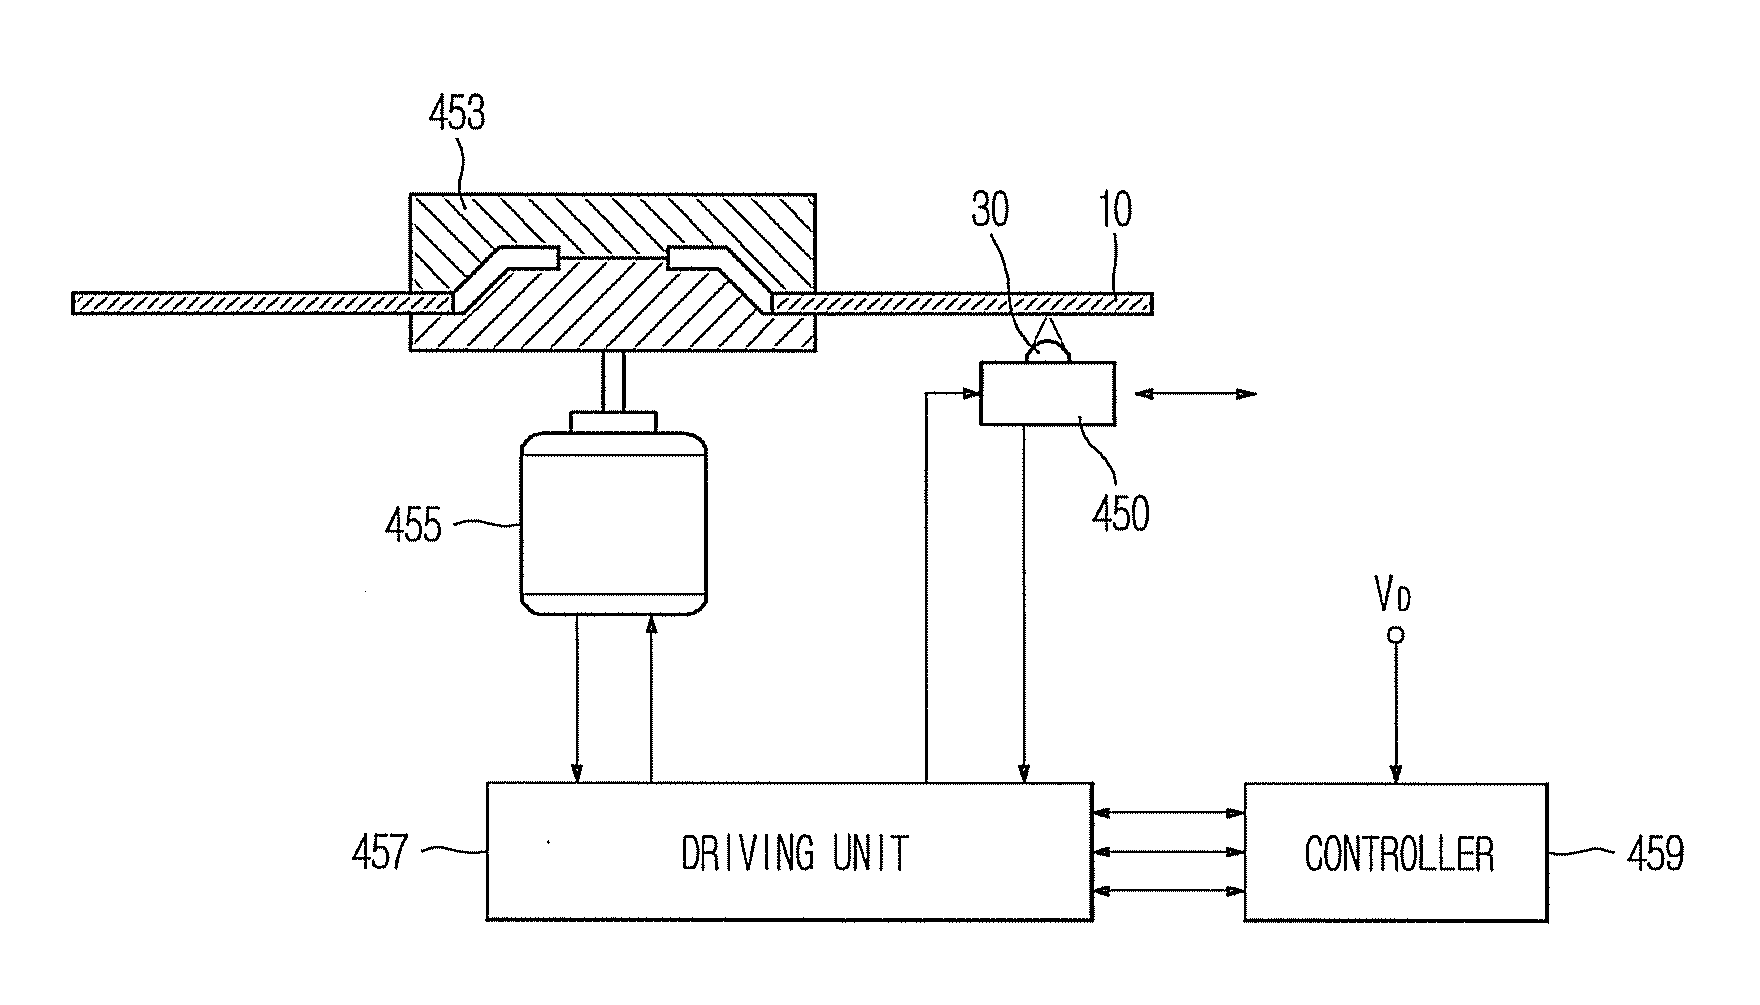 Optical pick-up and disc apparatus having the same